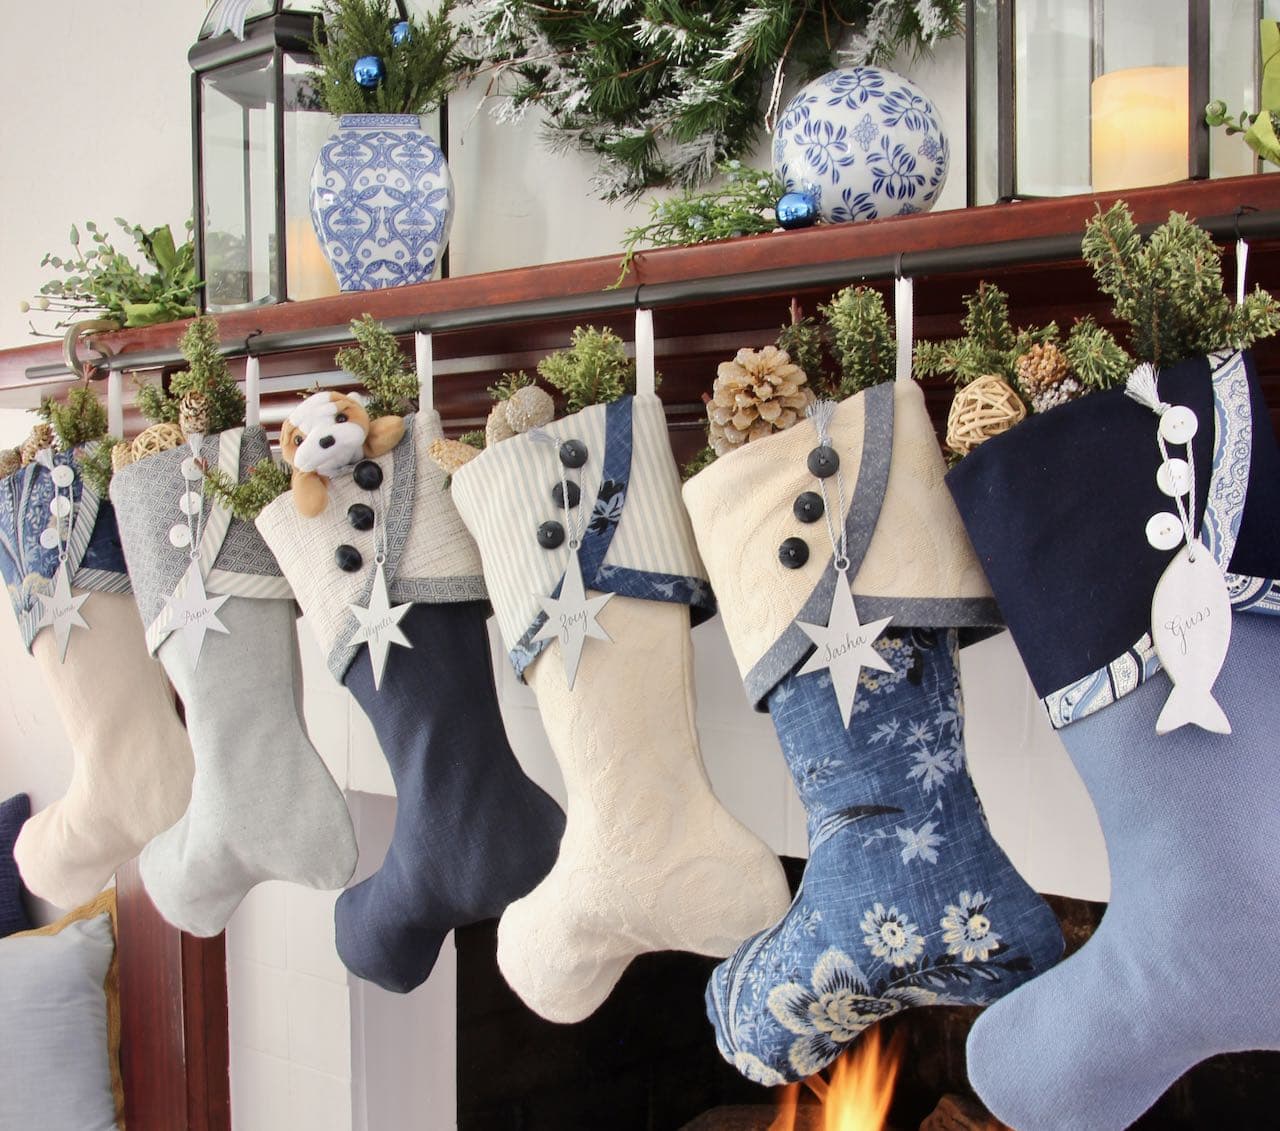 The Blues Christmas Stockings hanging from a dark wood mantel with silver star name tags